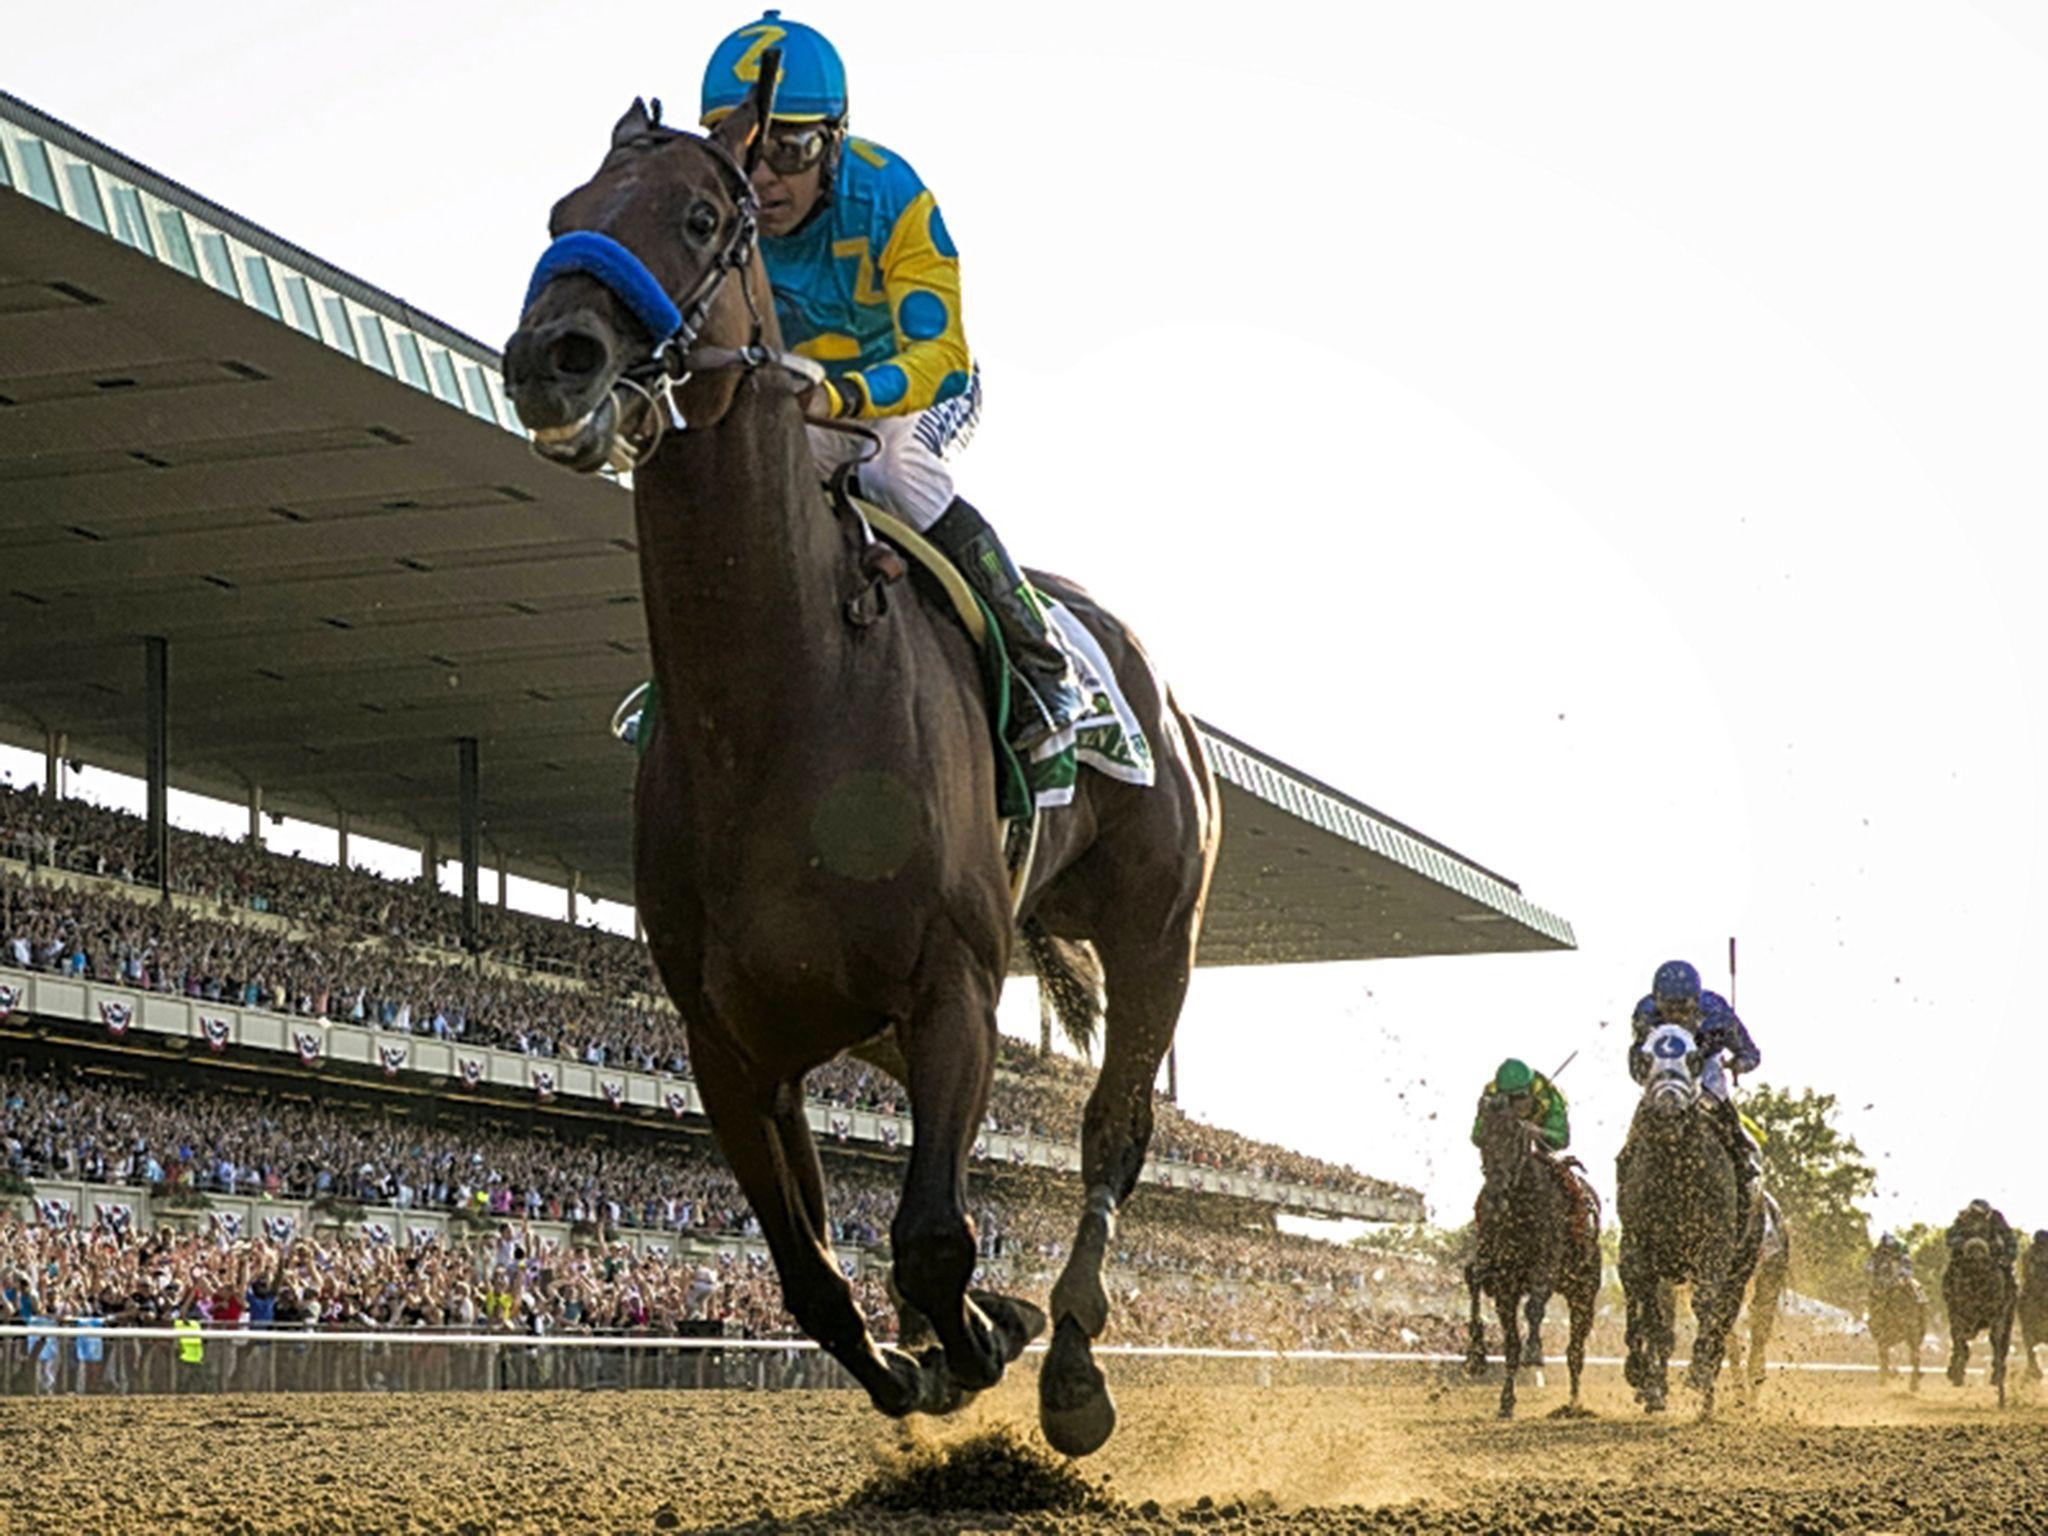 American Pharoah. History of the Triple Crown winners and famous